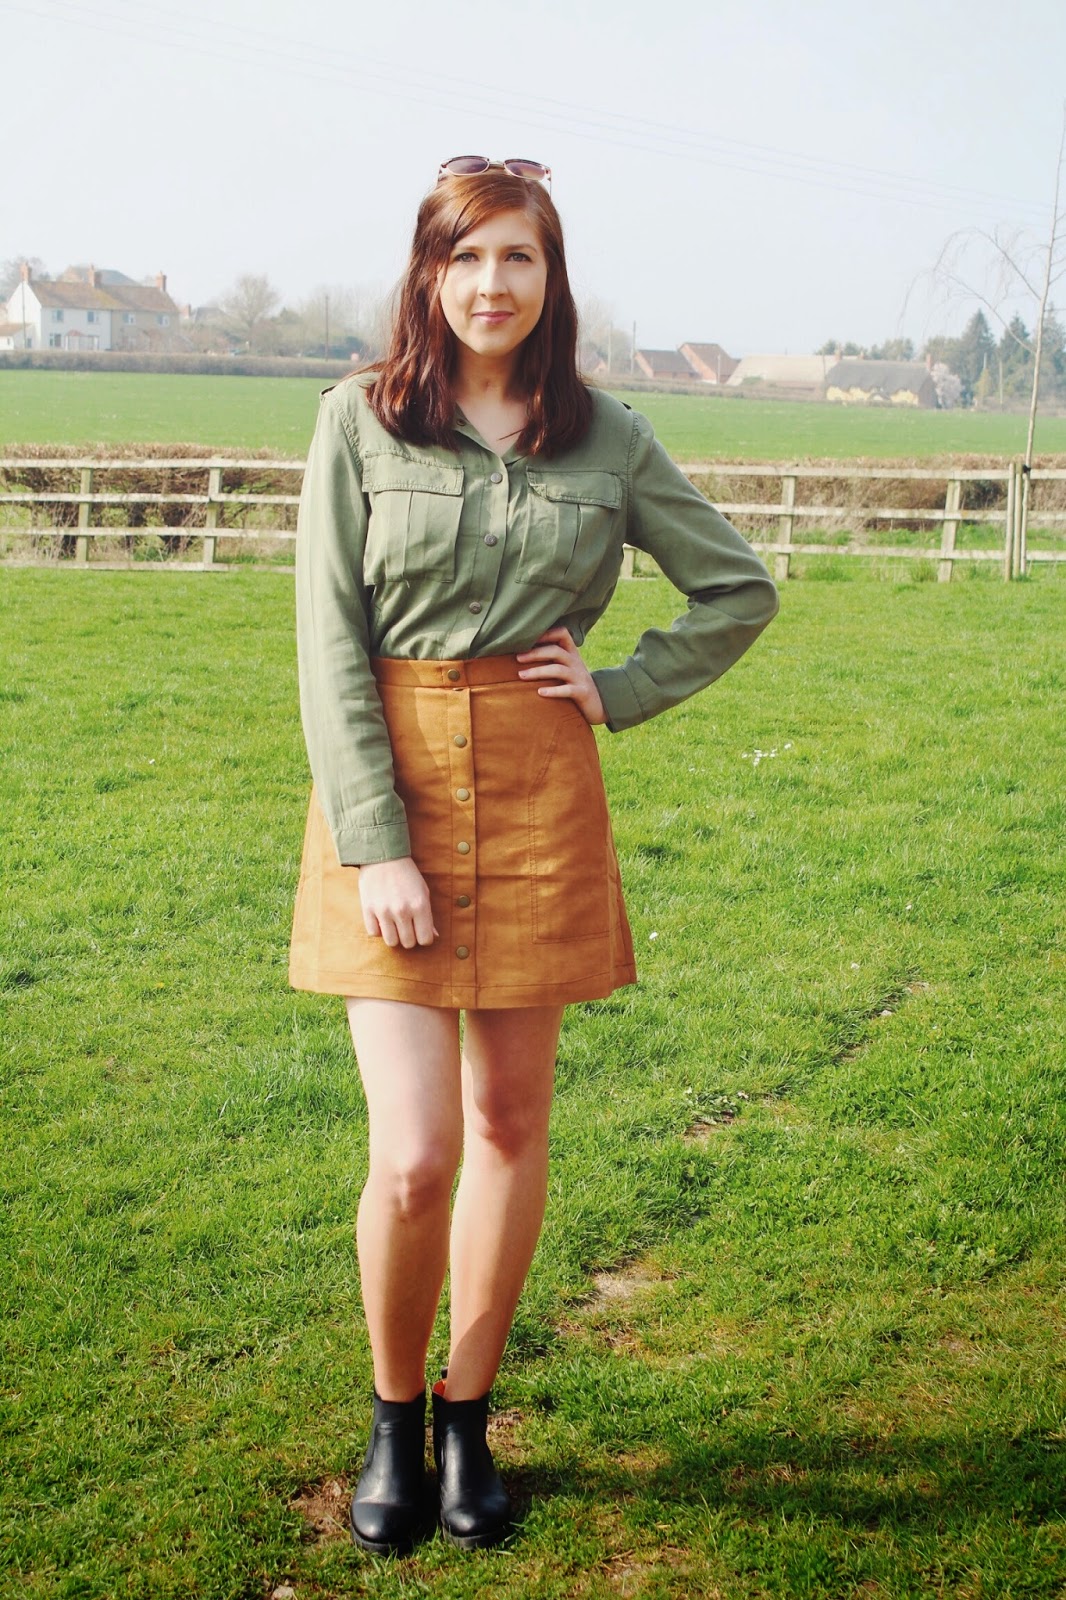 asseenonme, asos, primark, H&M, suede, military, khaki, bloggers, halcyon velvet, fblogger, wiw, whatimwearing, ootd, outfitoftheday, lotd, lookoftheday, fashion, fashionbloggers, fashionblogger